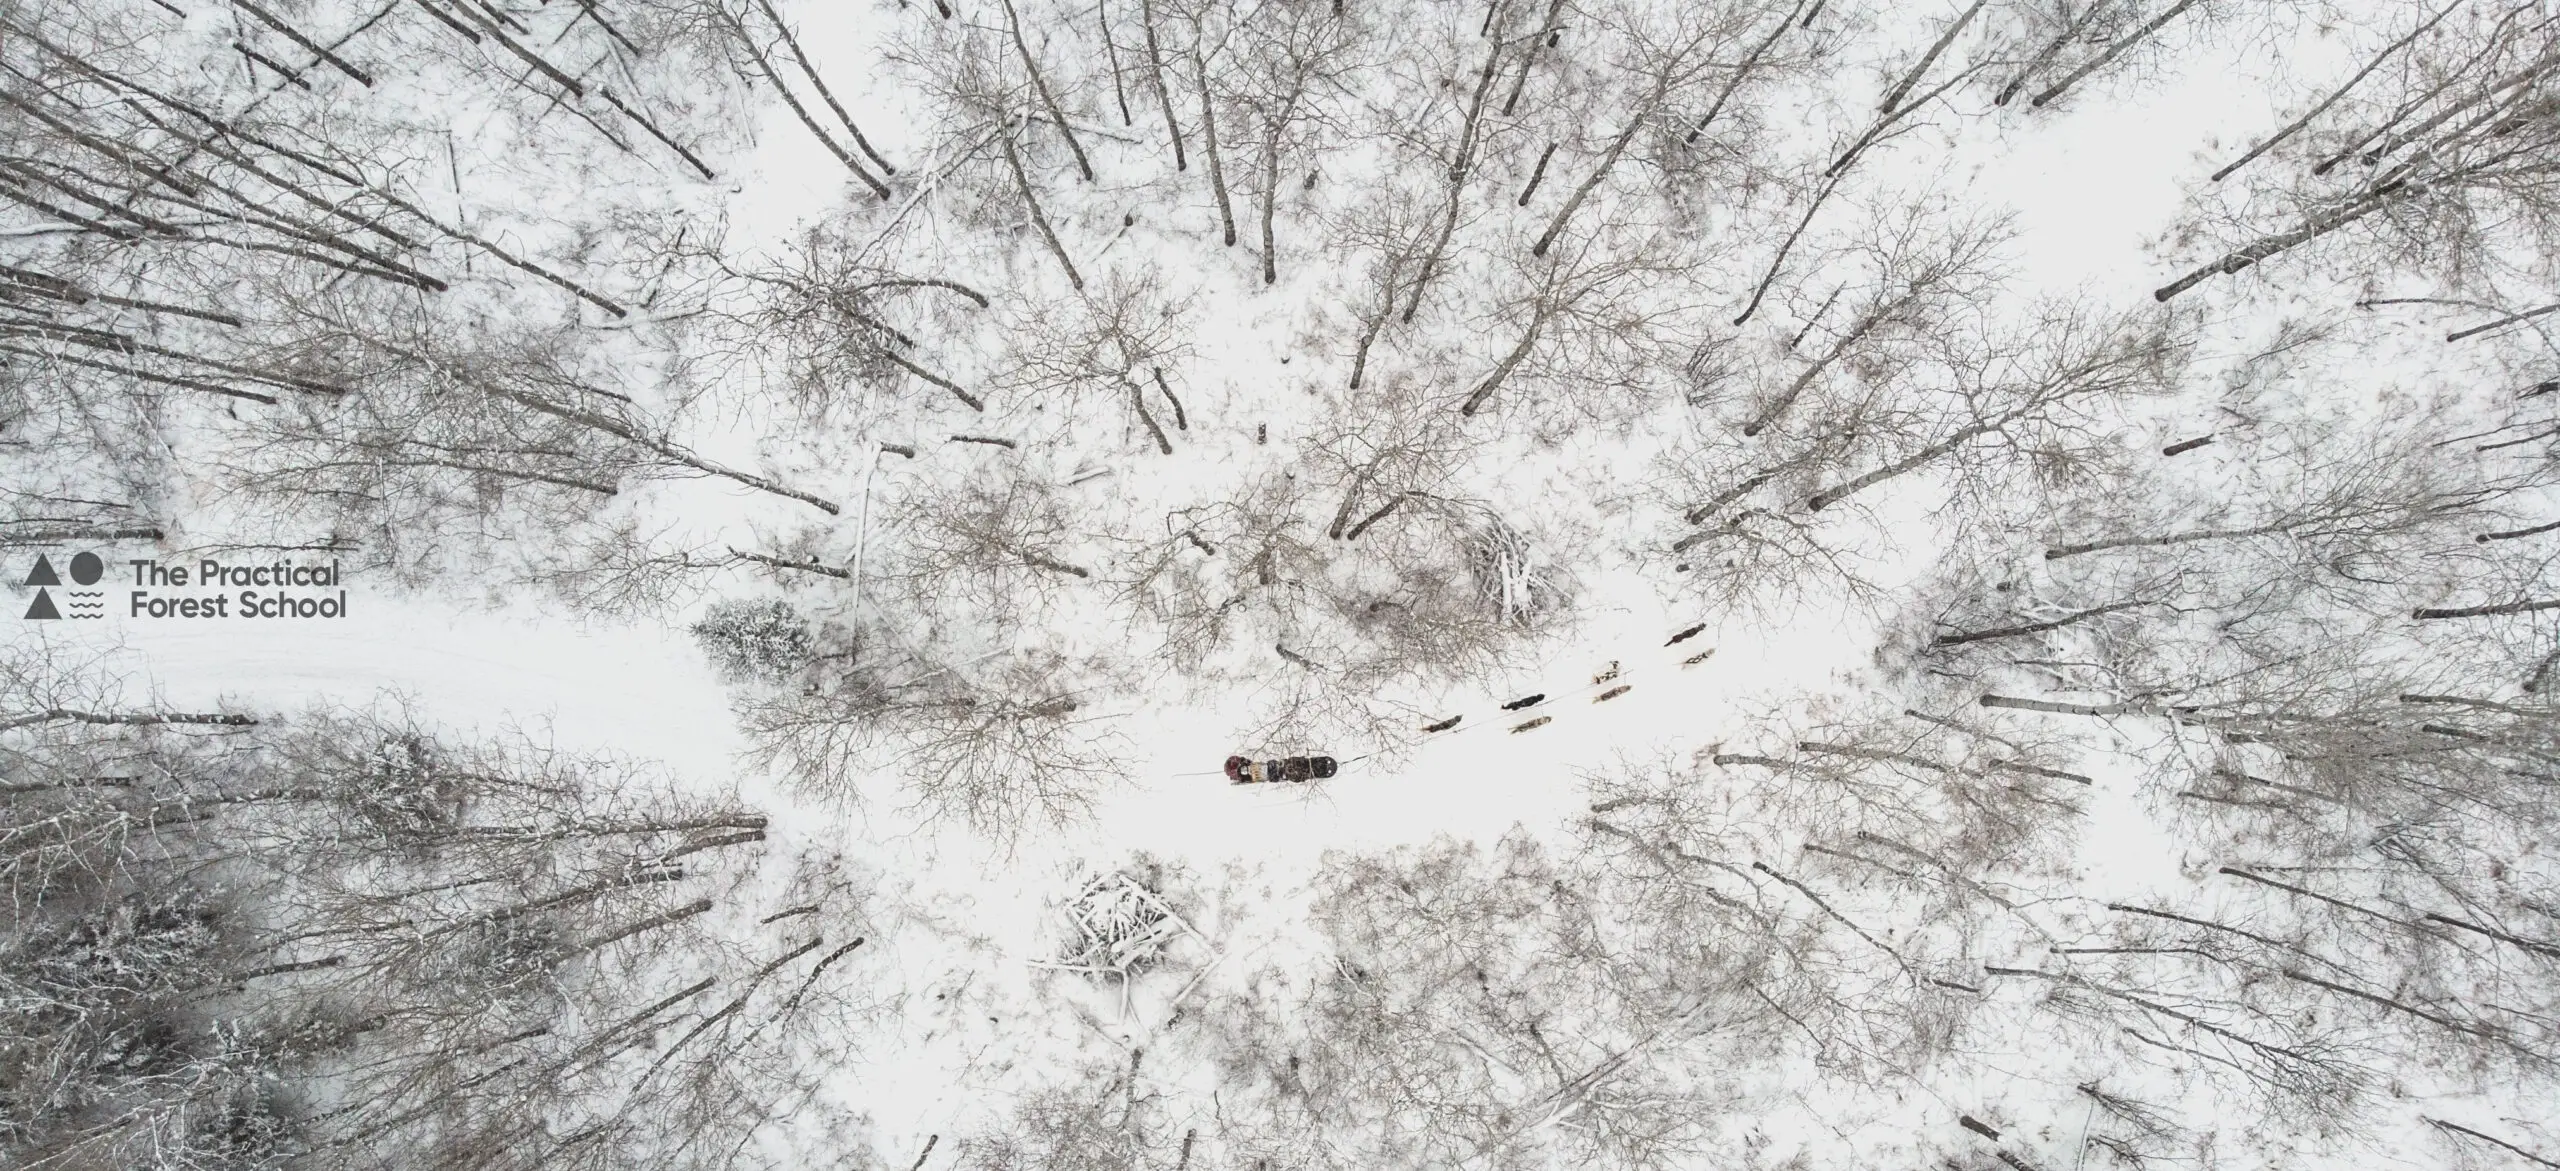 Dog sled from above driving through a snowy landscape